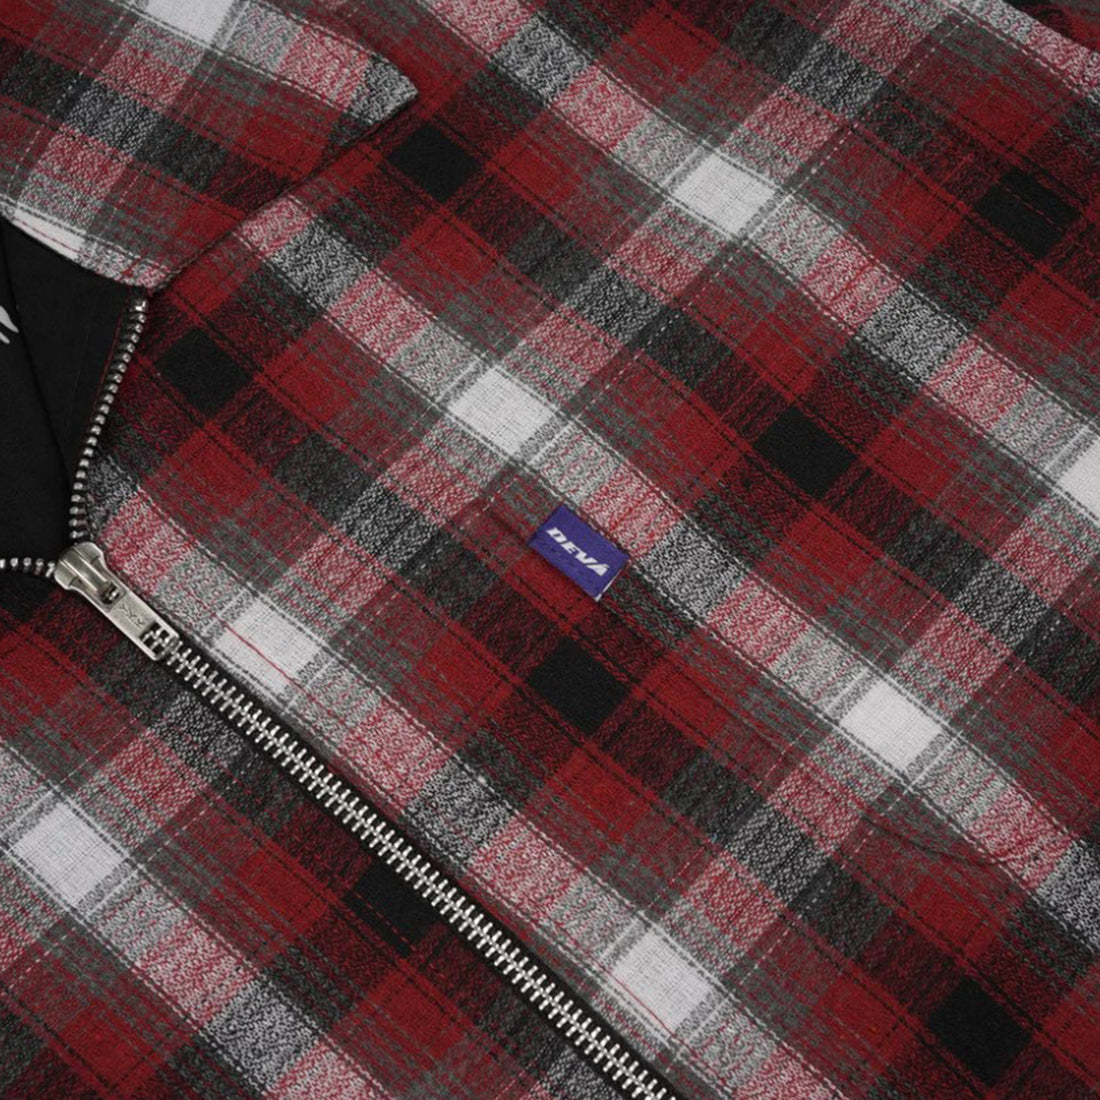 Giacca camicia Devà States - Zip-up Flannel Overshirt -Rosso